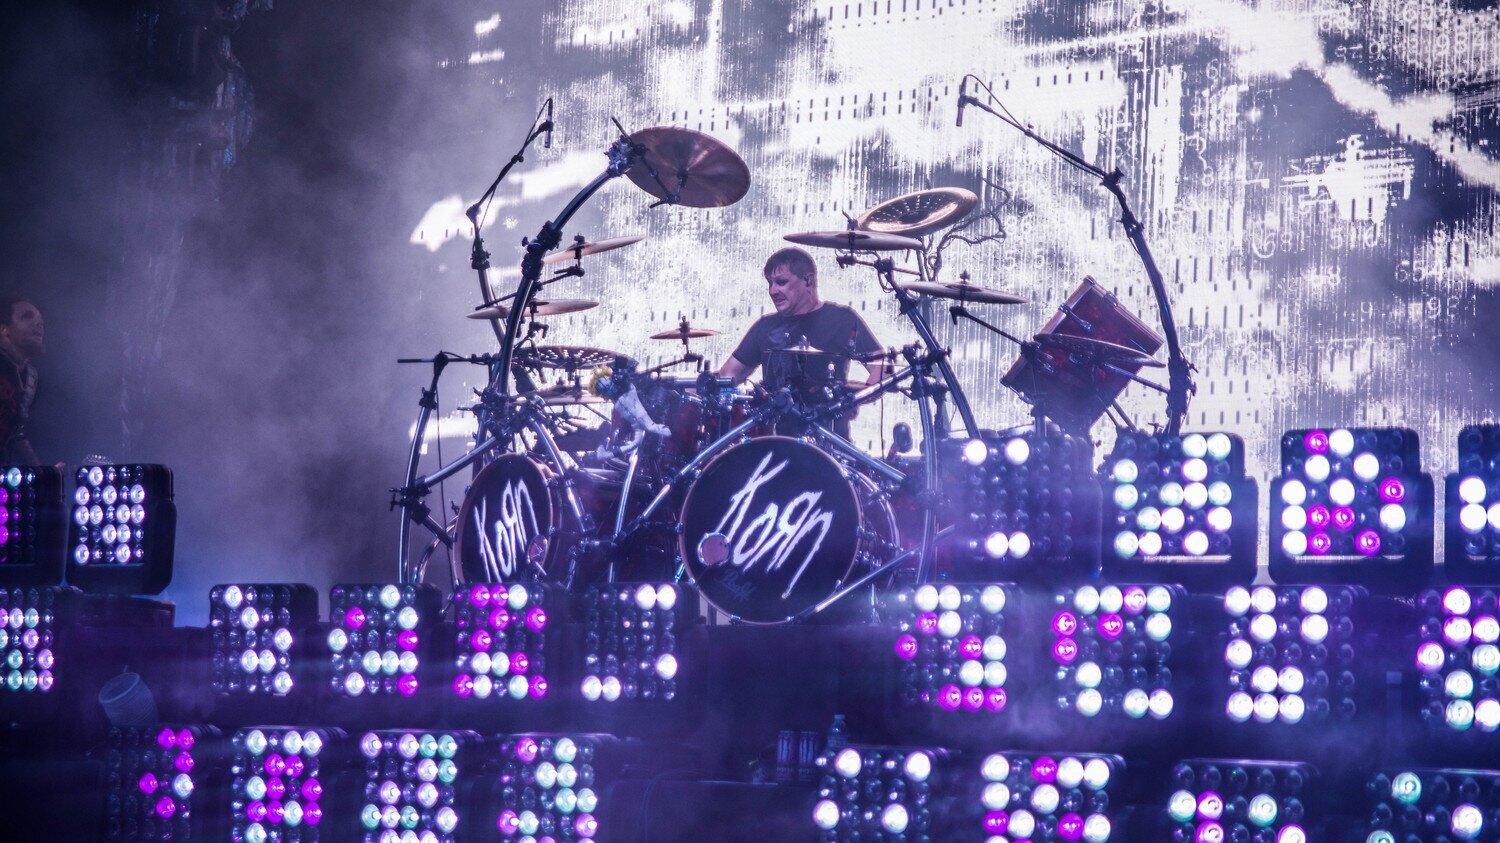 Korn drummer ray luzier tests positive for covid